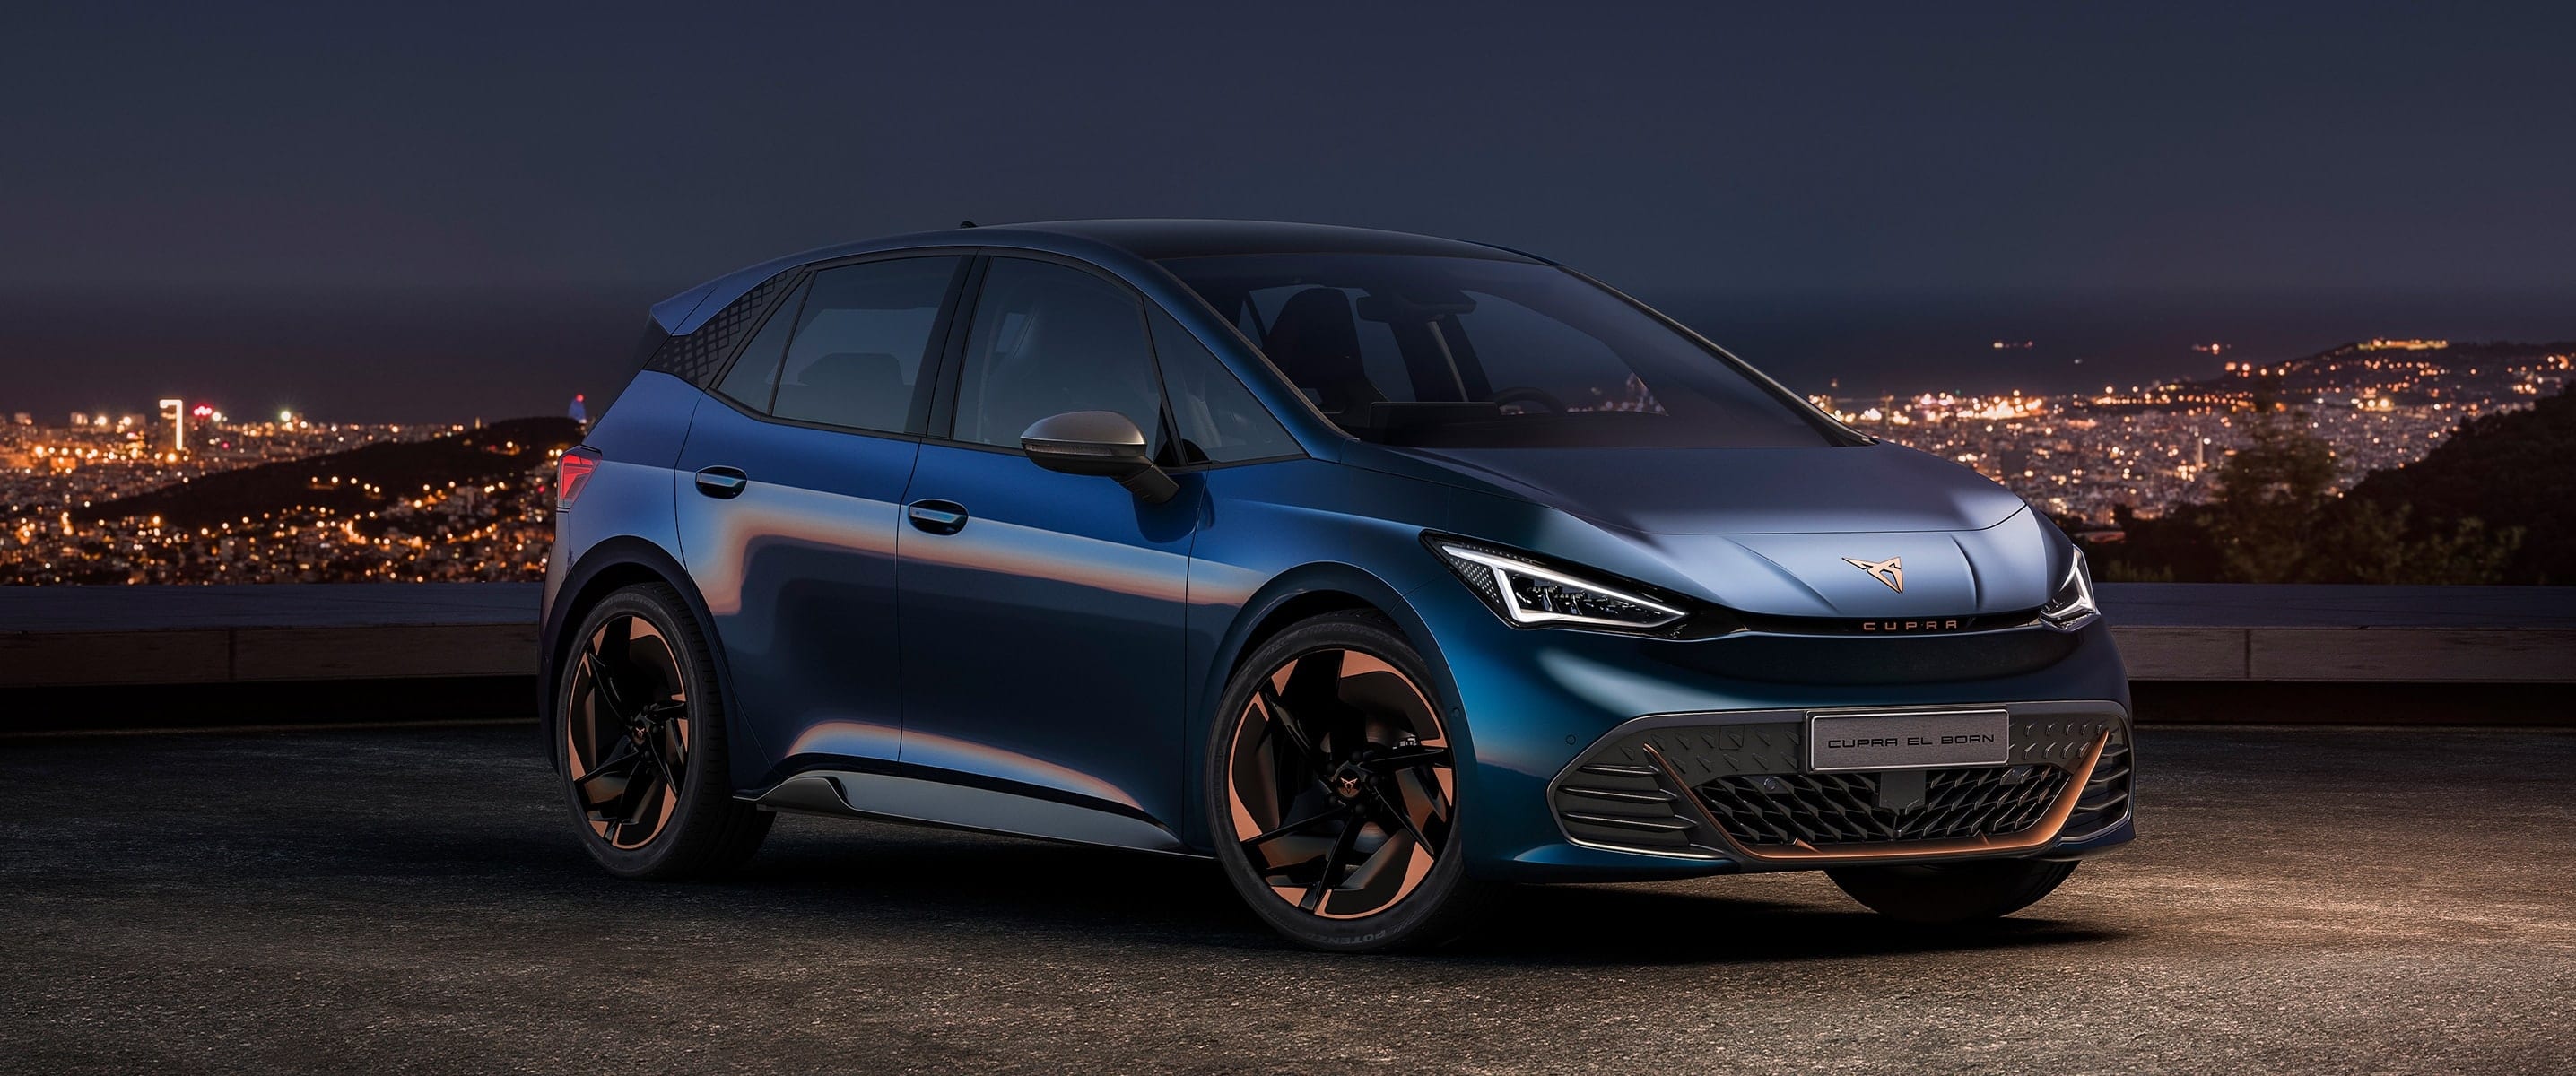 CUPRA’s first all-electric vehicle is Born